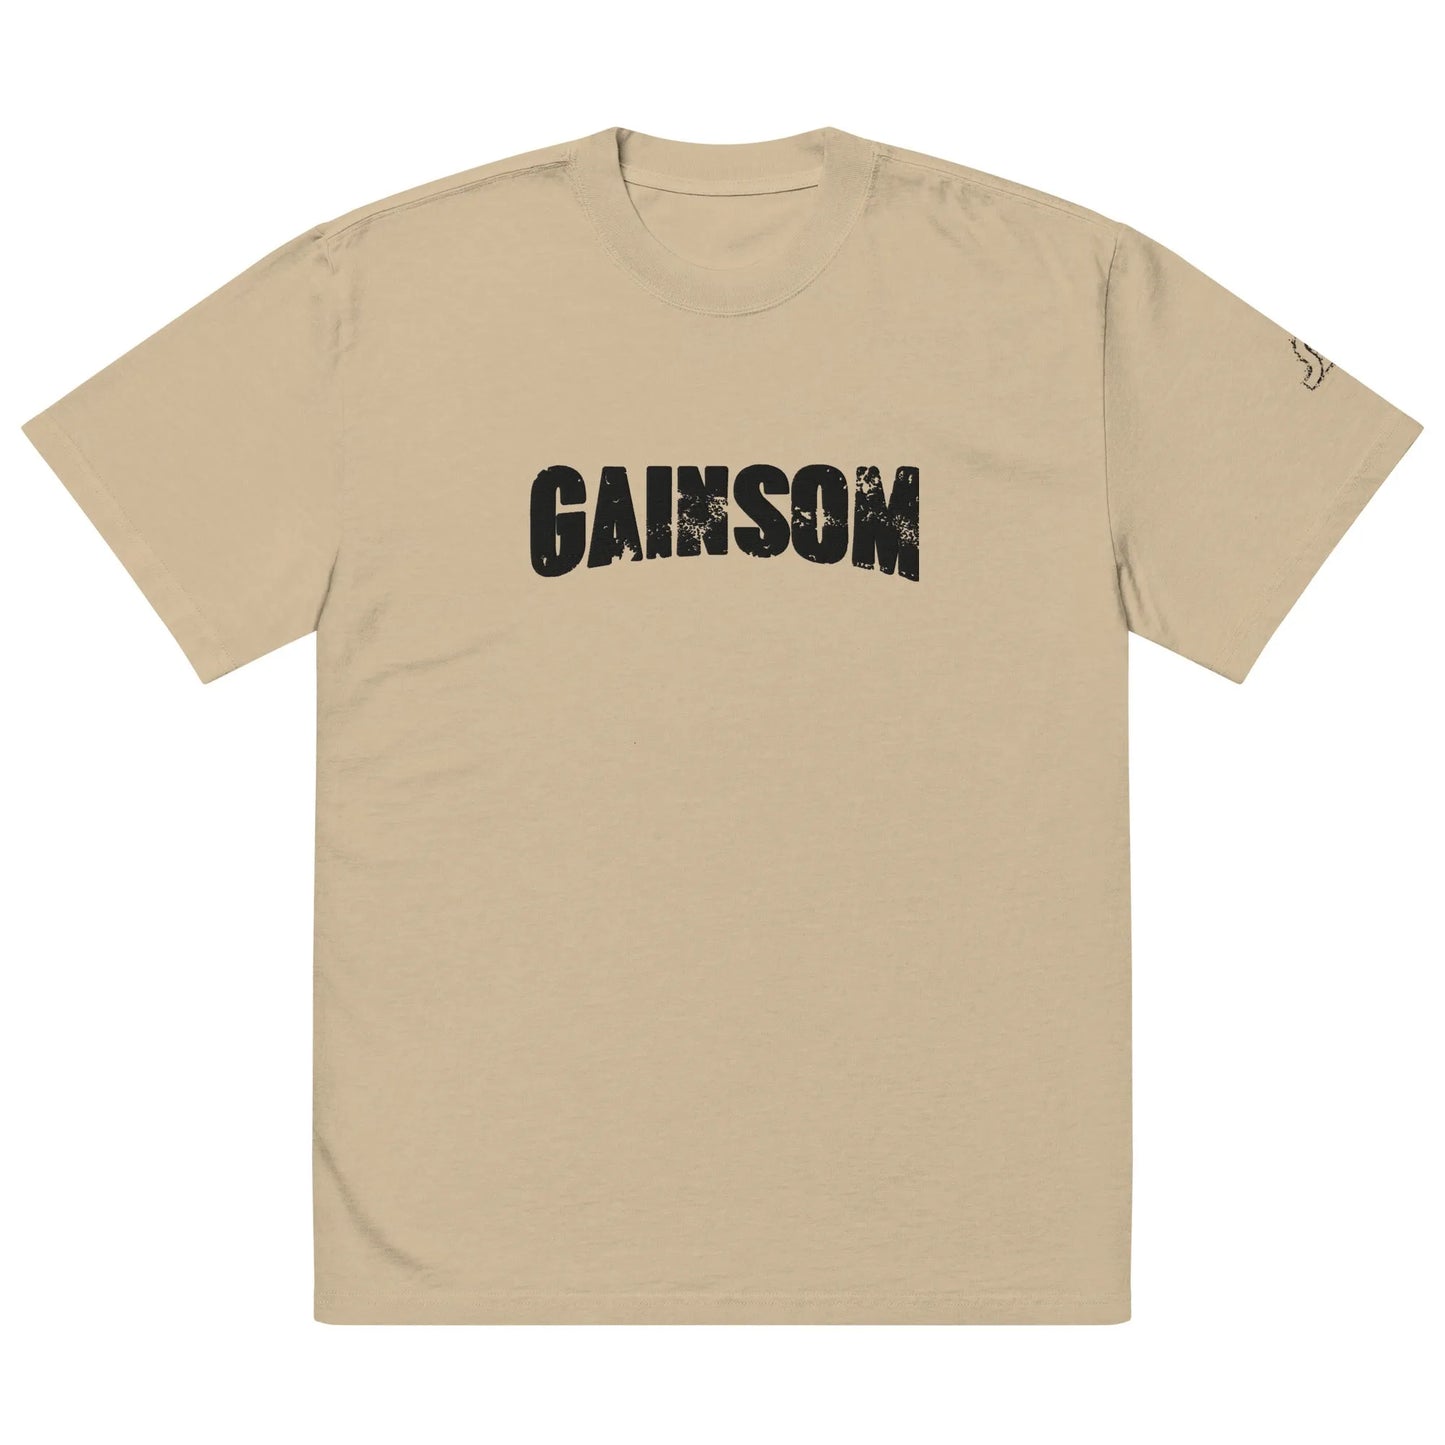 Oversized faded t-shirt - Gainsom